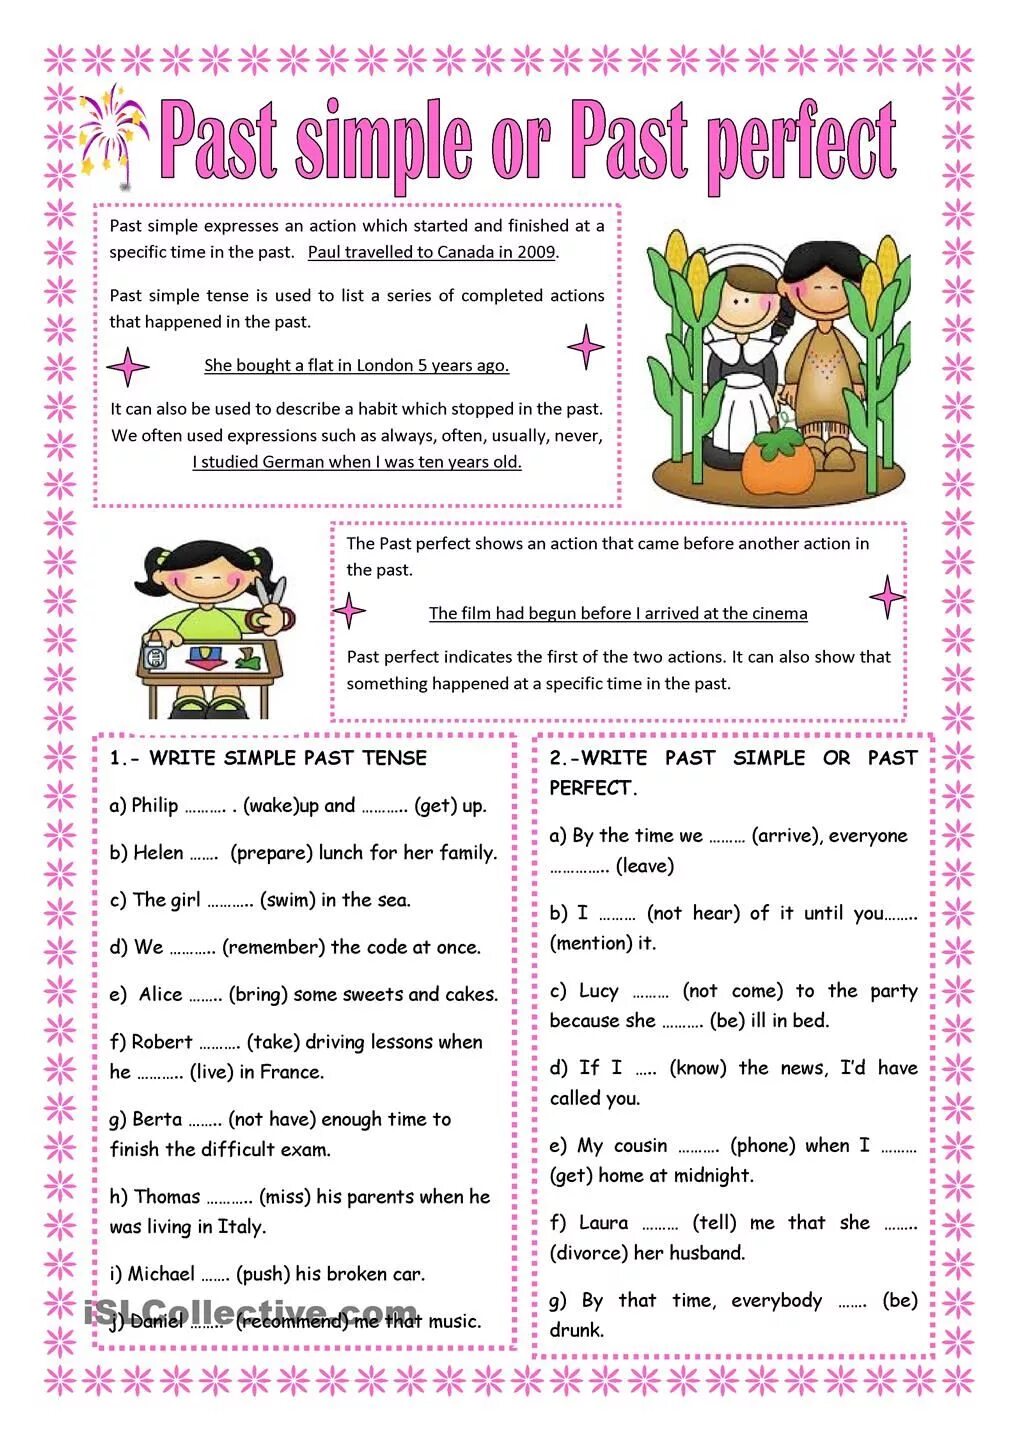 Past simple or present perfect exercises. Past simple vs past perfect Worksheets. Present perfect vs past simple exercise. Present perfect past simple упражнения. Past simple past perfect упражнения Worksheets.